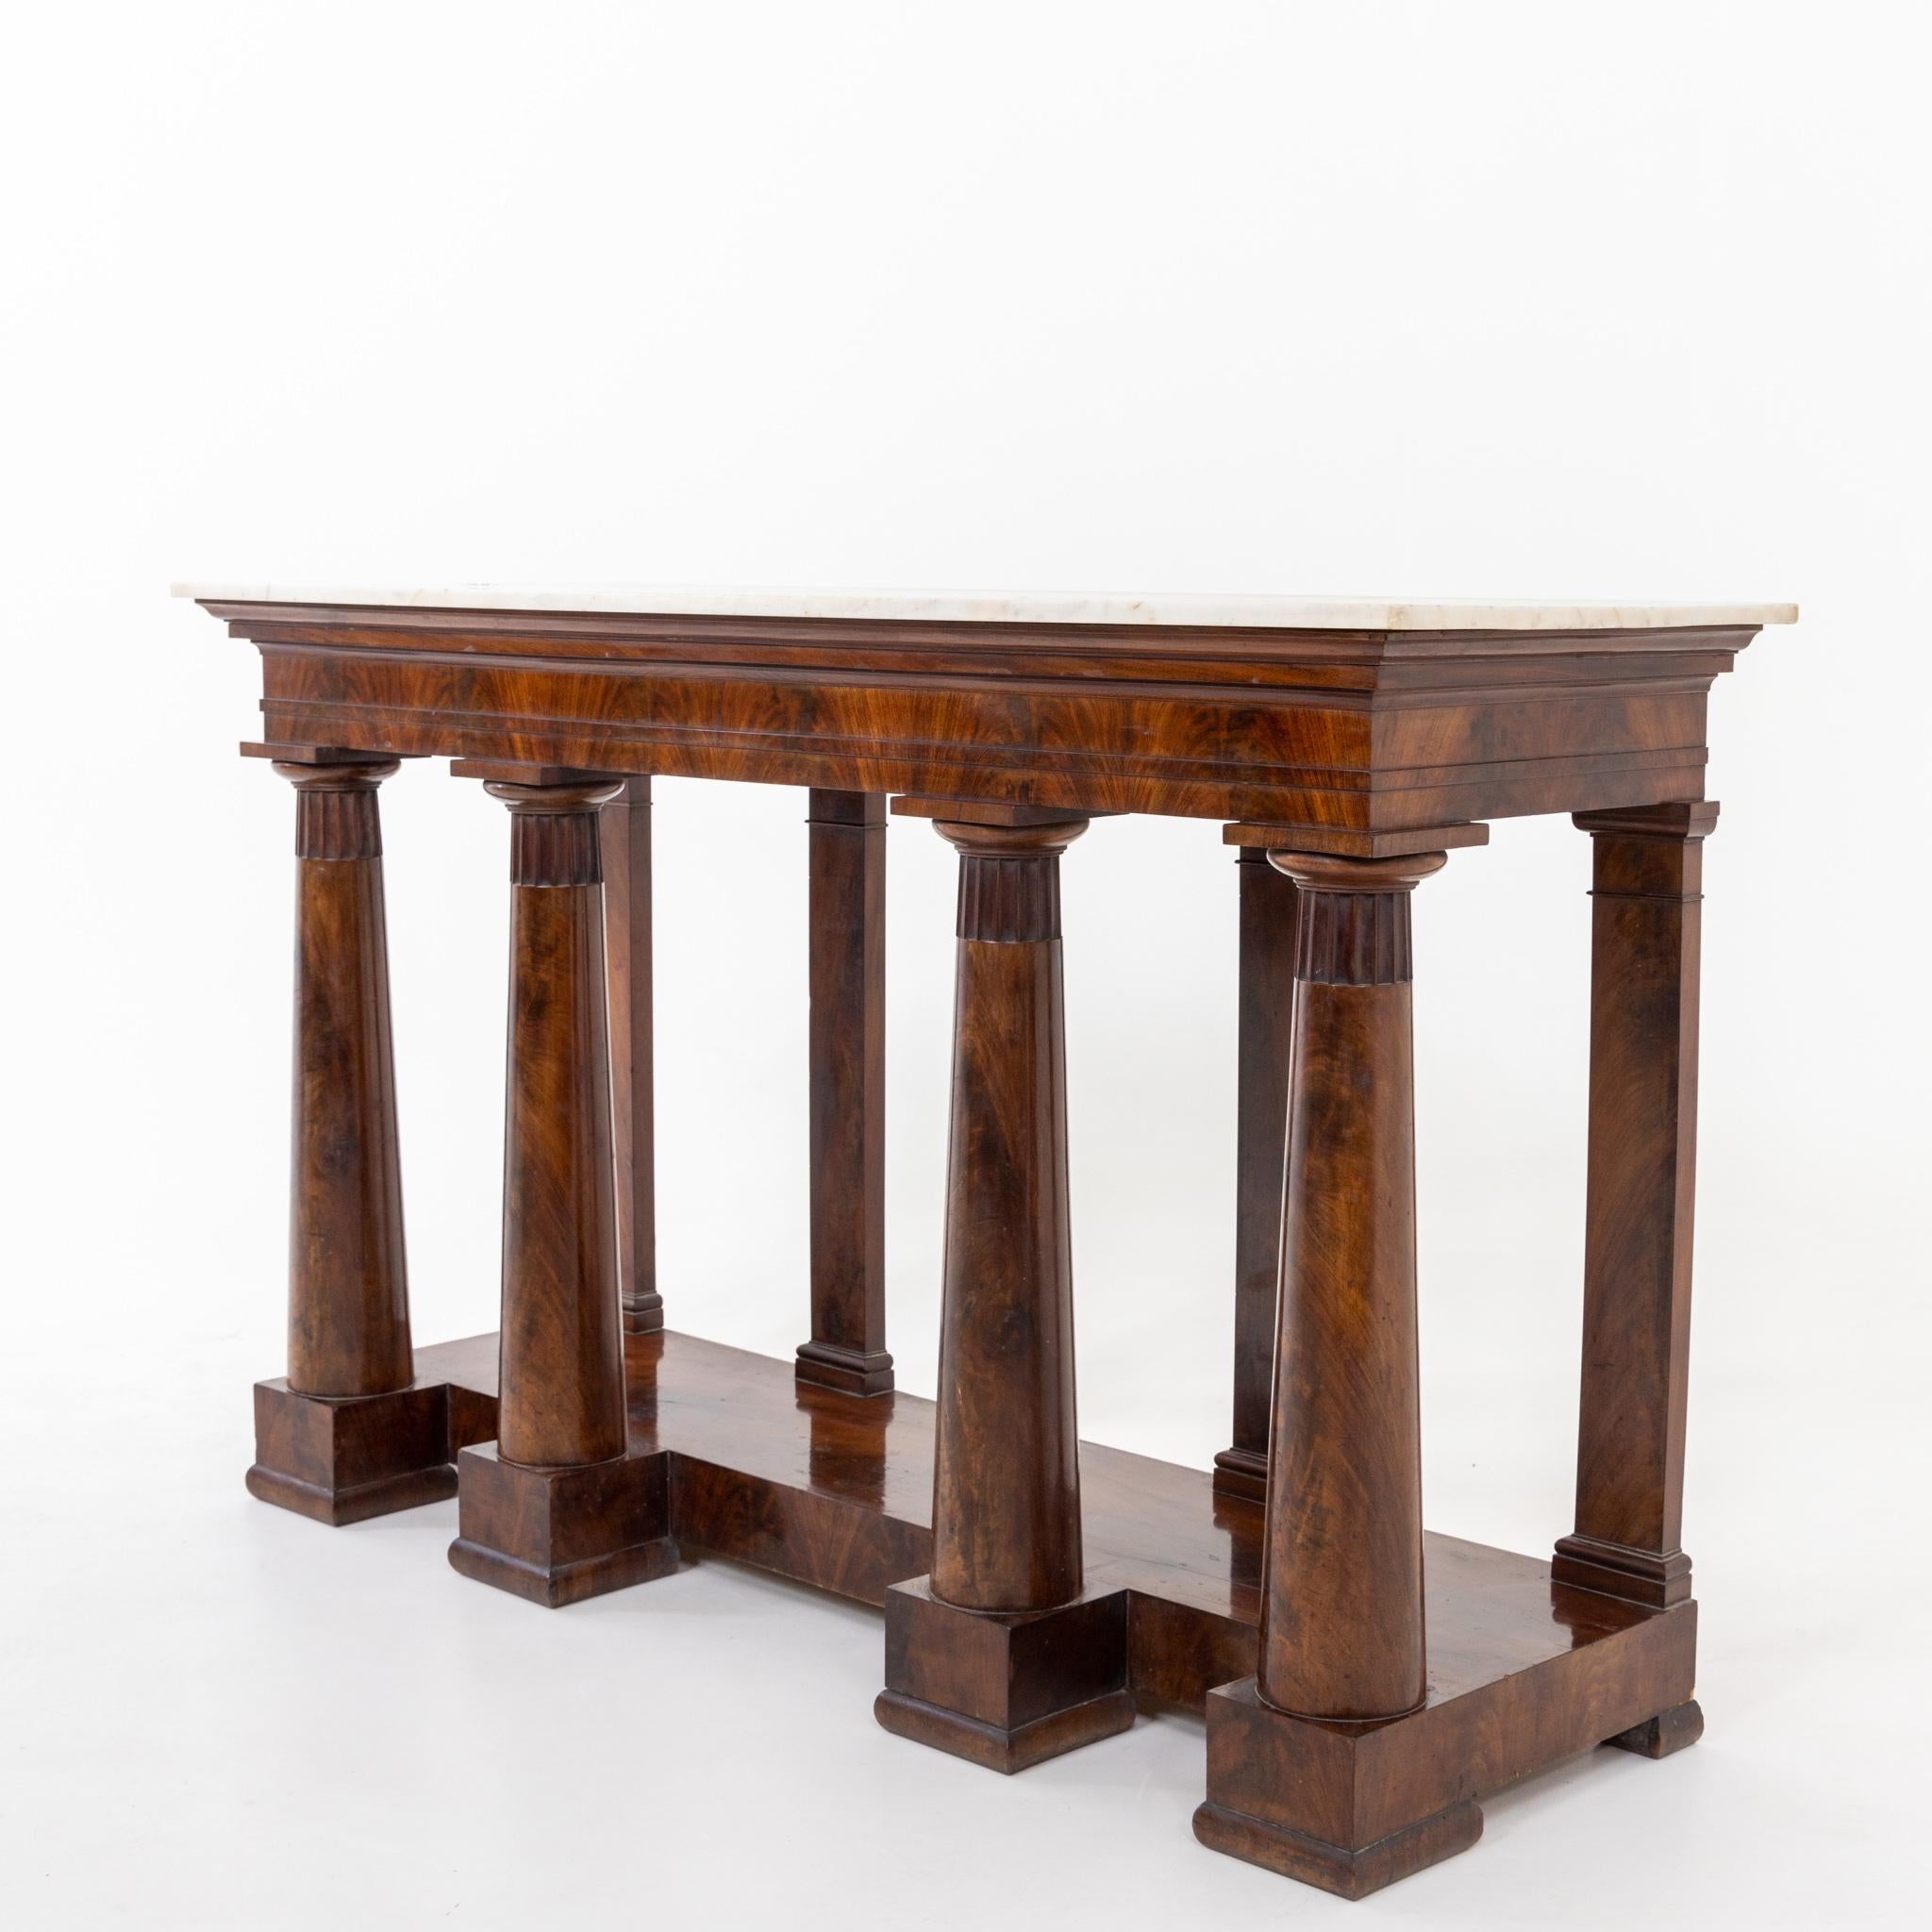 Italian Neoclassical Console Table, Italy / Naples, early 19th Century